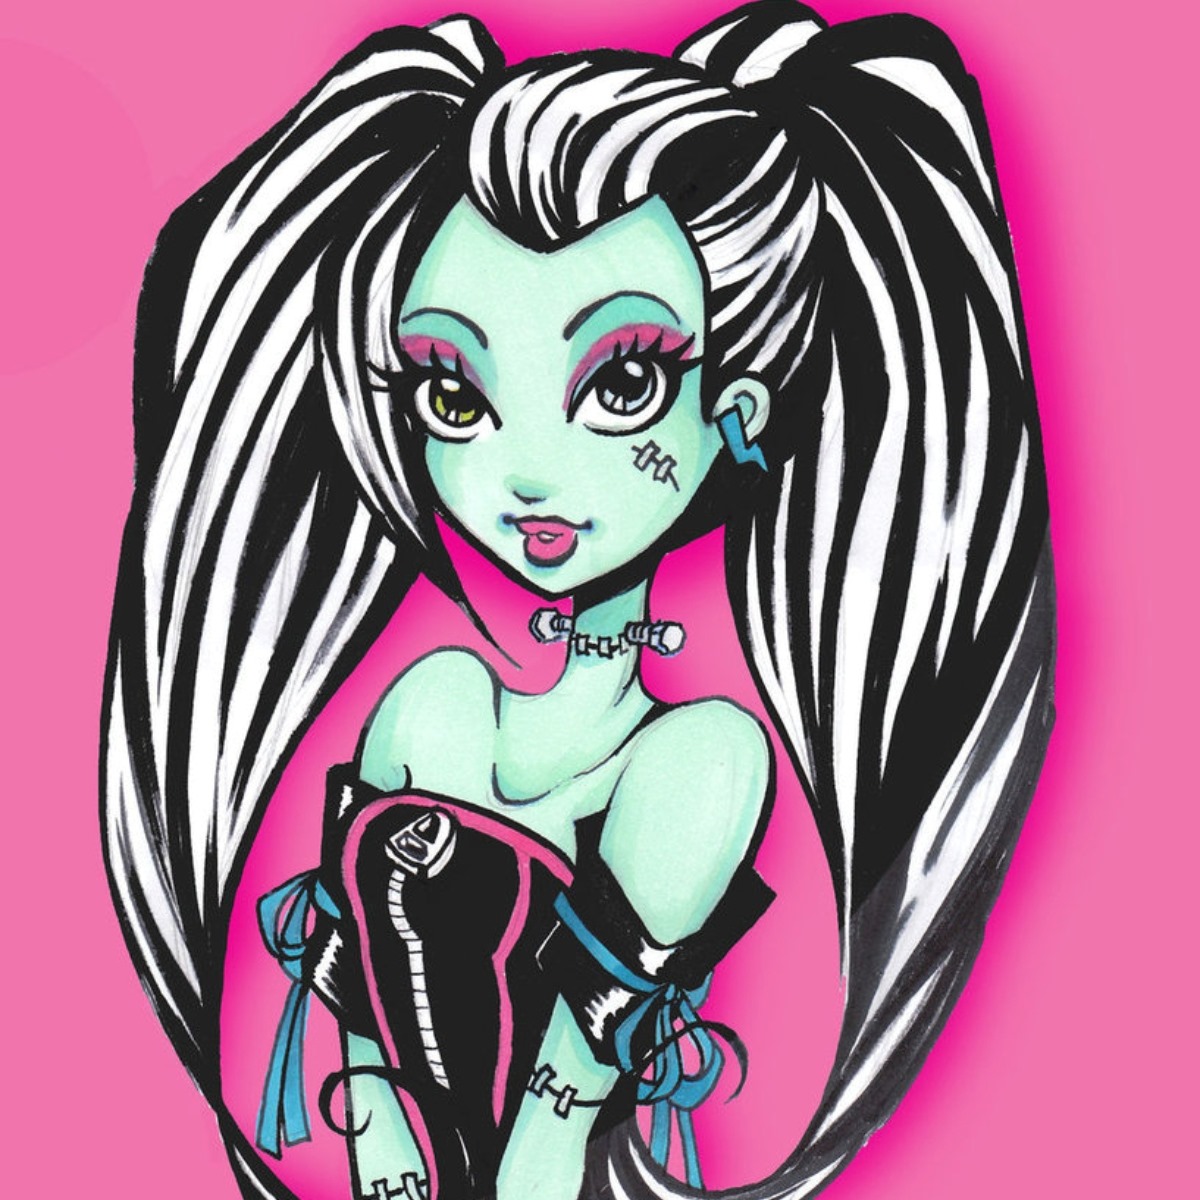 10 Facts About Frankie Stein (Monster High) - Facts.net